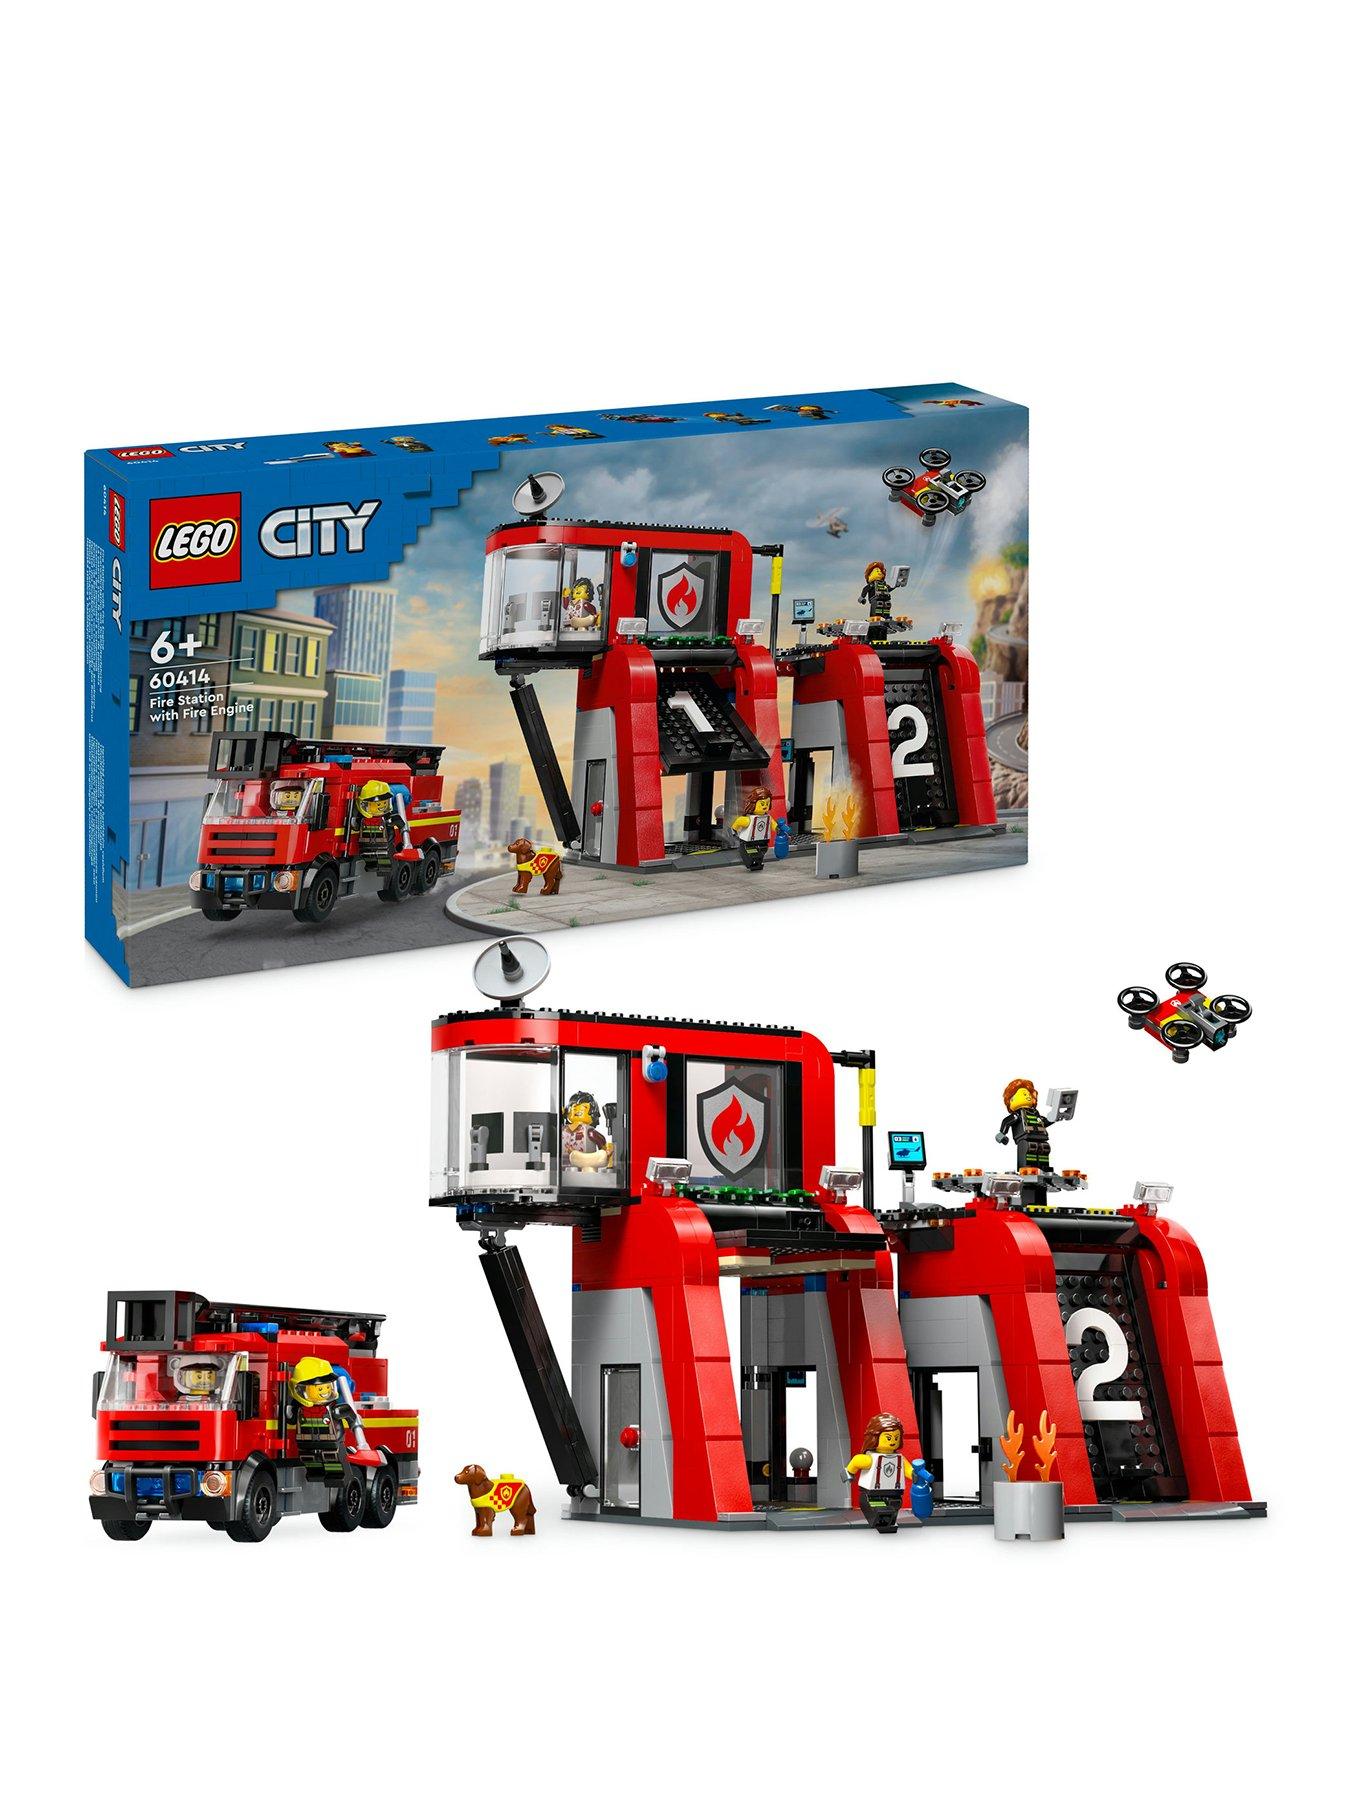 LEGO City Fire Station with Fire Engine Playset 60414 | Very.co.uk